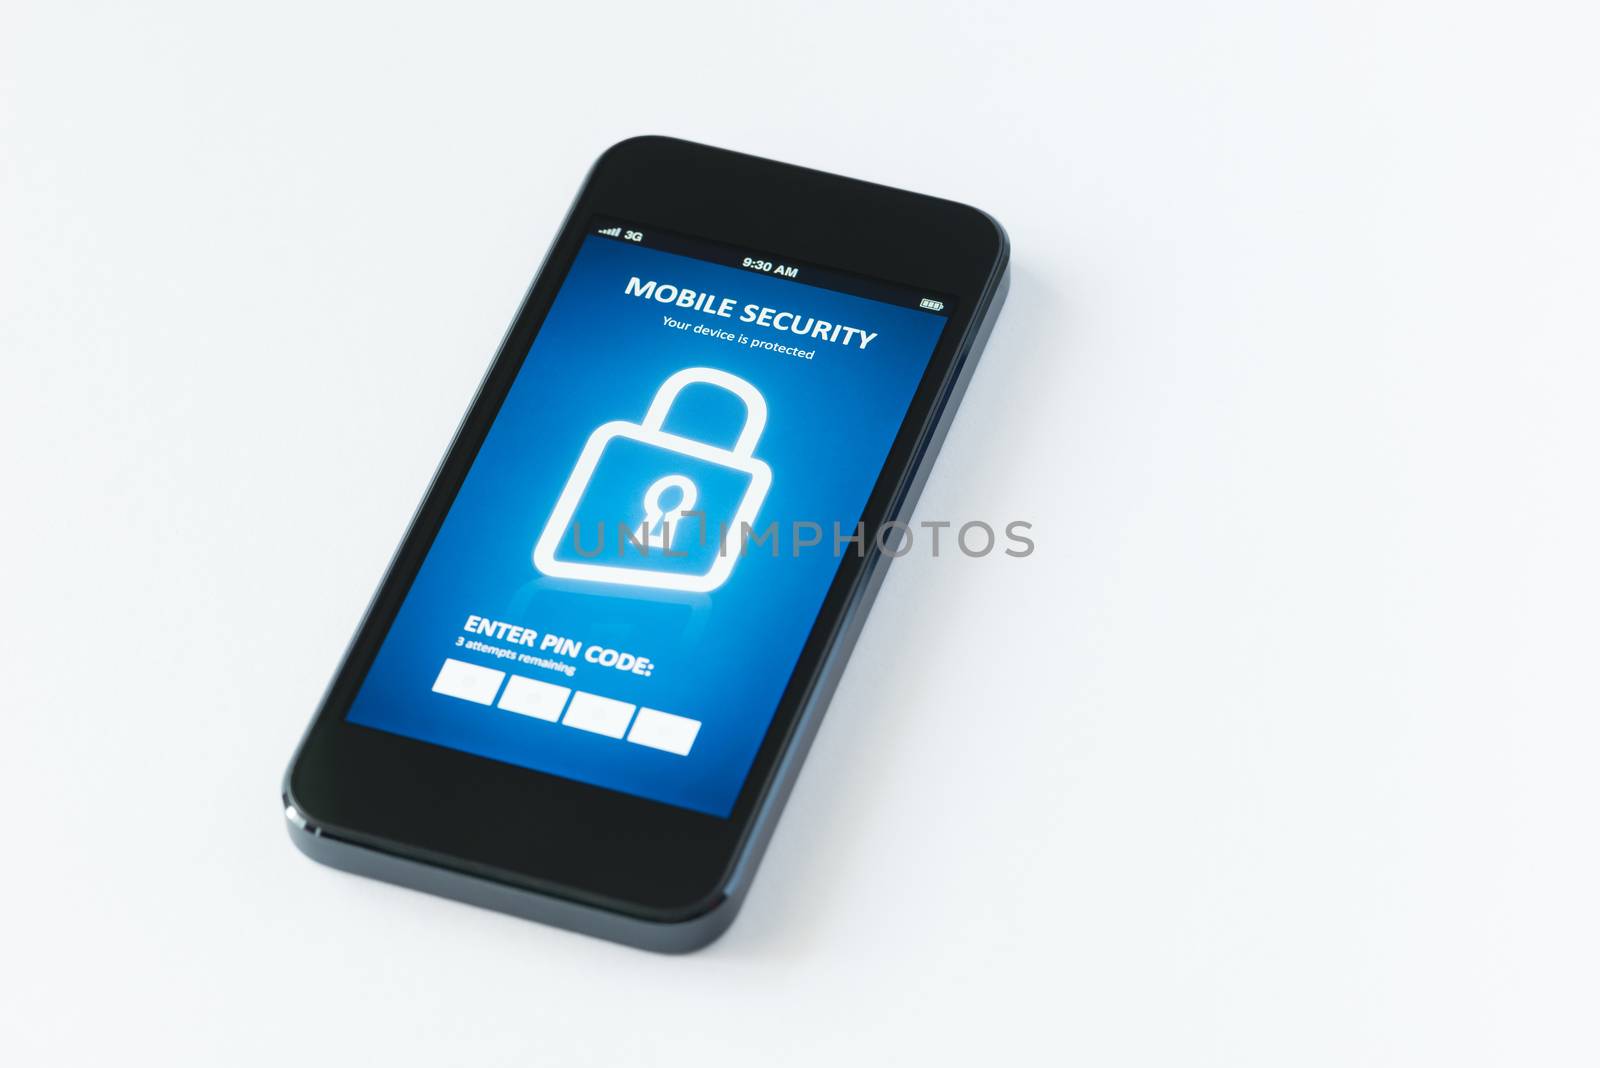 Mobile security app by bloomua